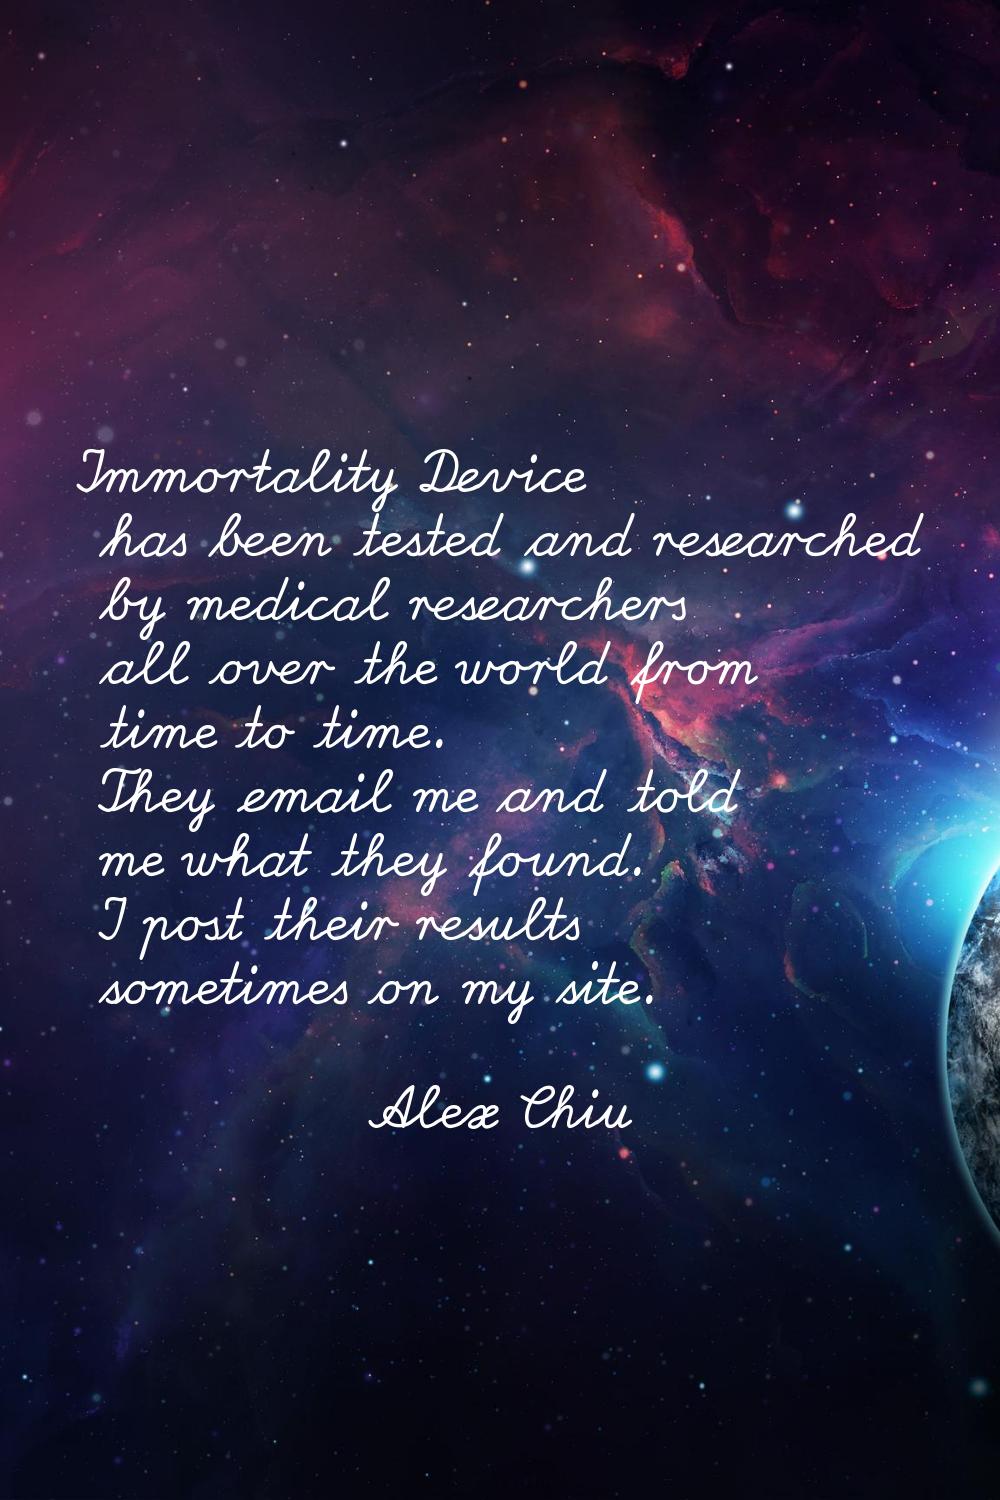 Immortality Device has been tested and researched by medical researchers all over the world from ti